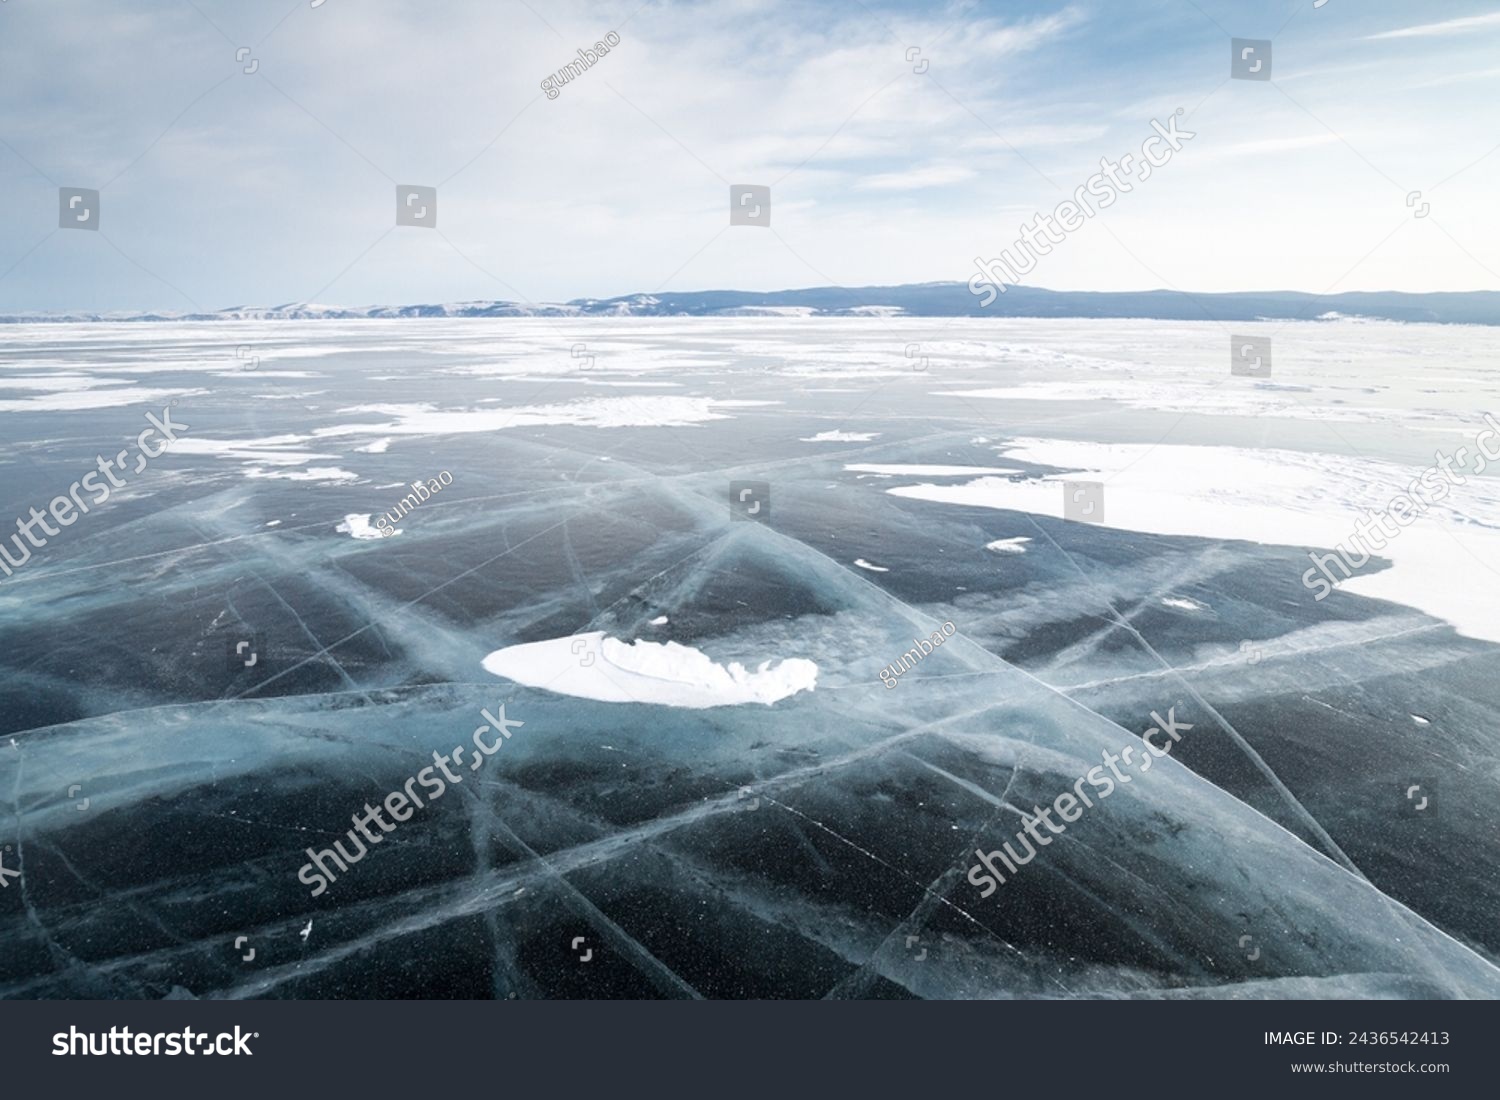 Lake Baikal in winter, the deepest and largest freshwater lake by volume in the world, located in southern Siberia, Russia #2436542413